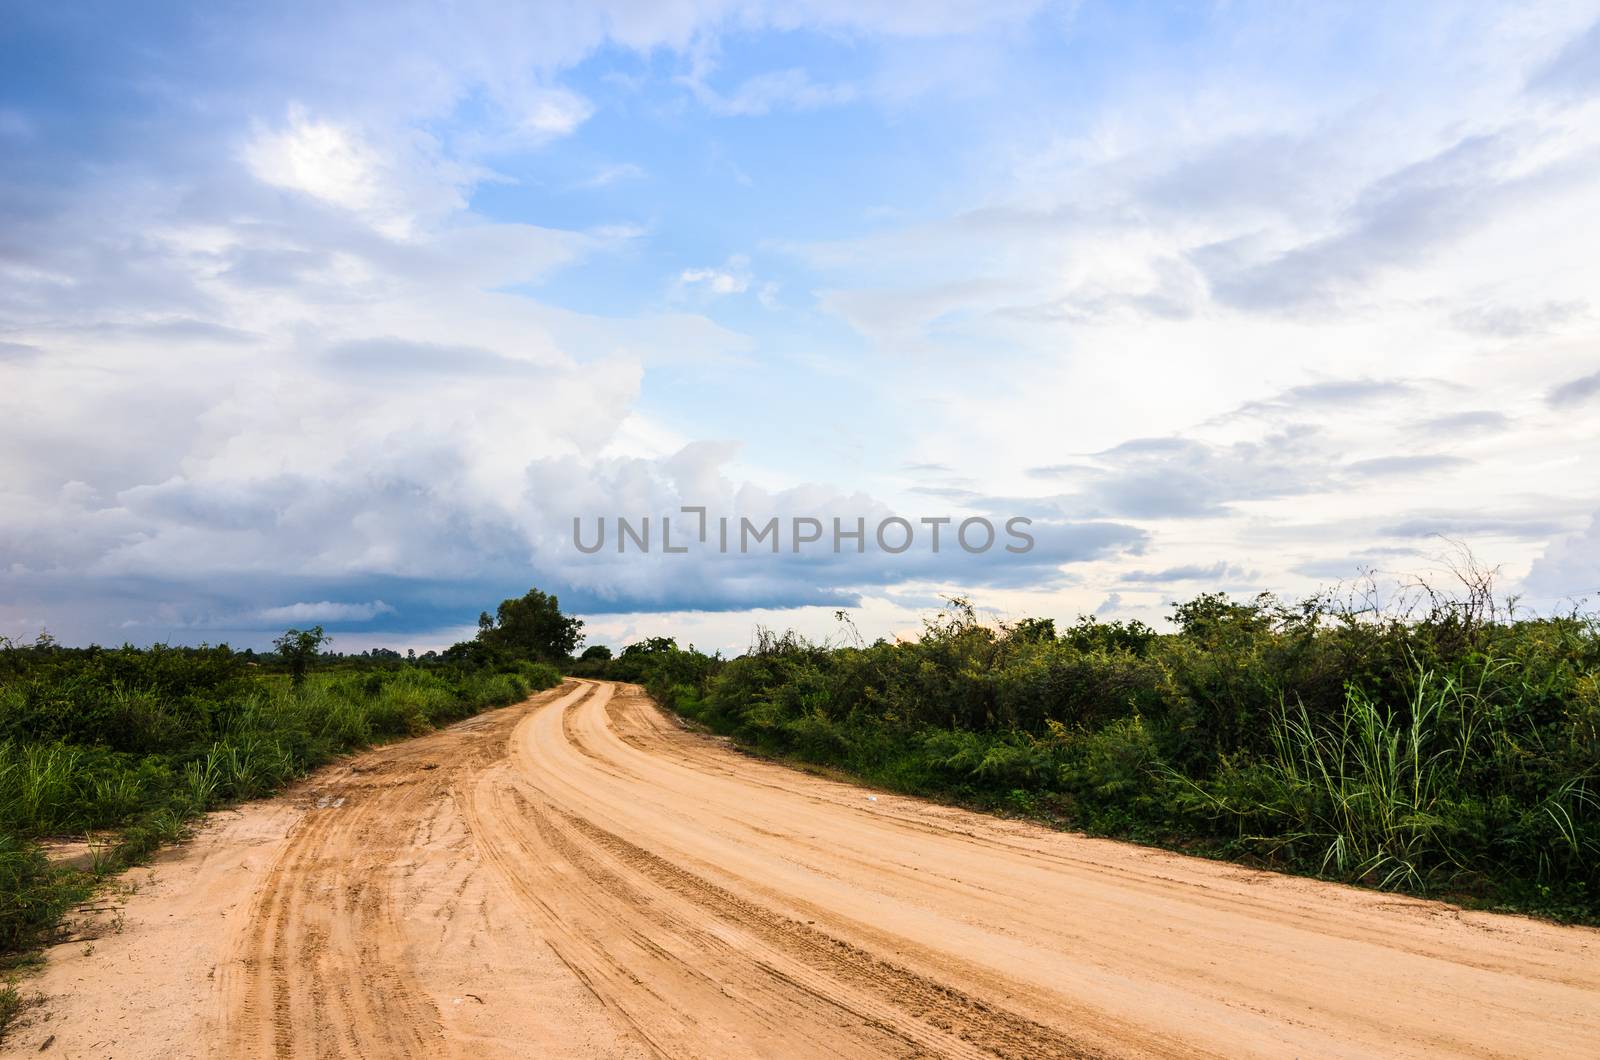 Soil road and grass meadow in  countryside view nature